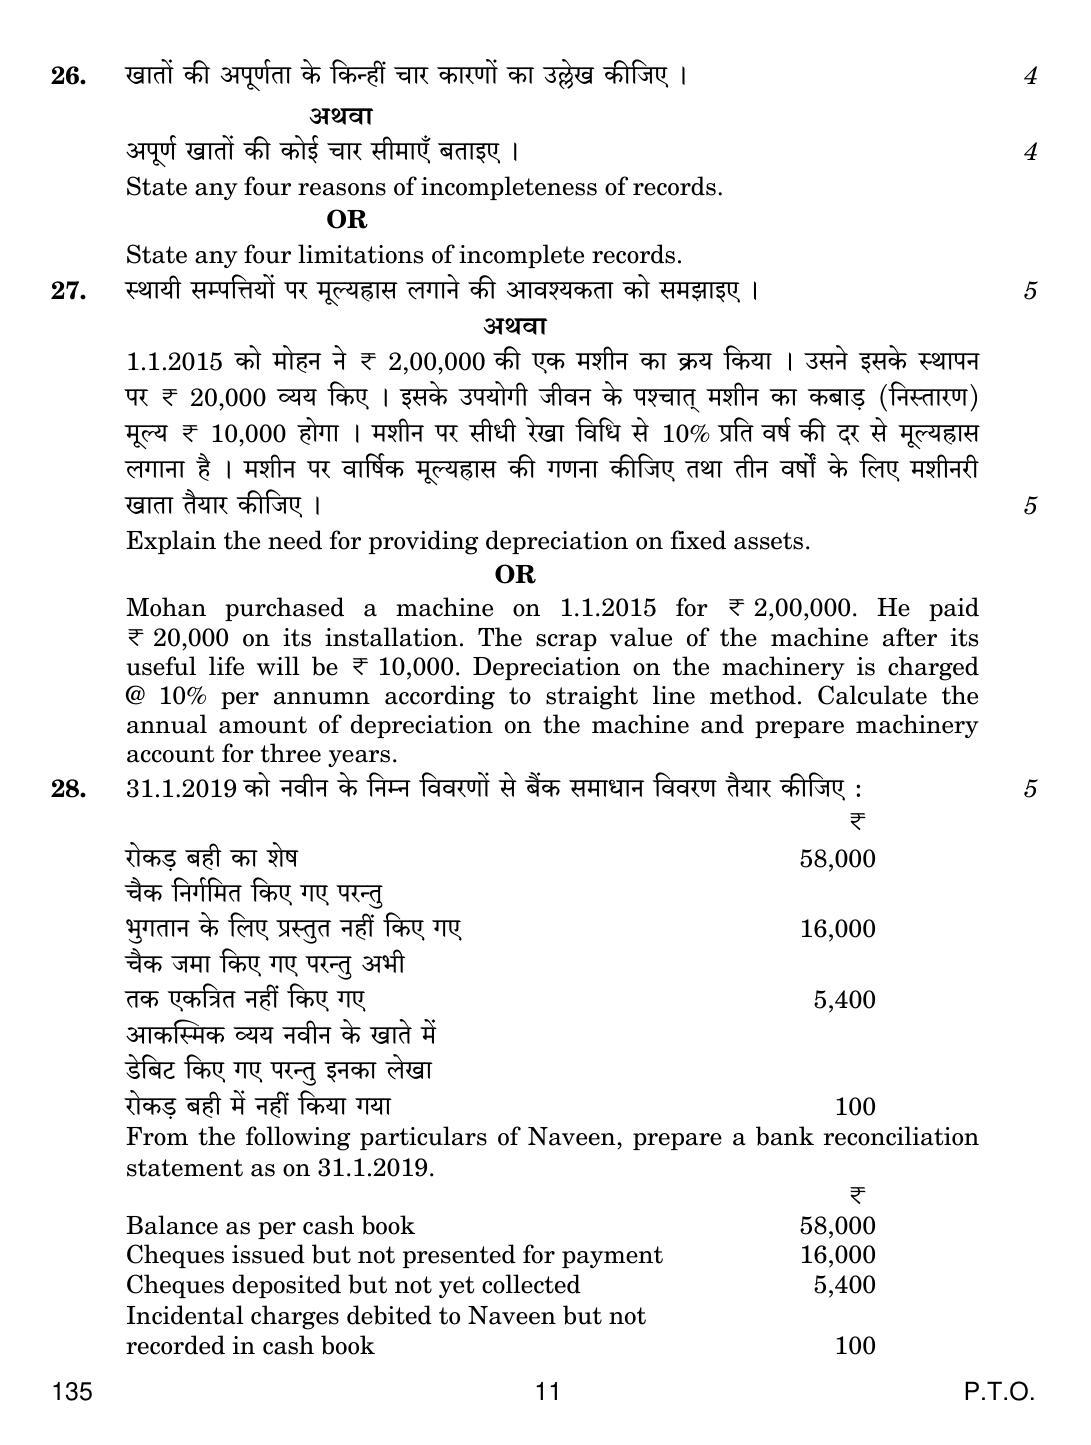 CBSE Class 10 135 ELEMENTS OF BOOK-KEEPING AND ACCOUNTANCY (COMMERCE) 2019 Question Paper - Page 11